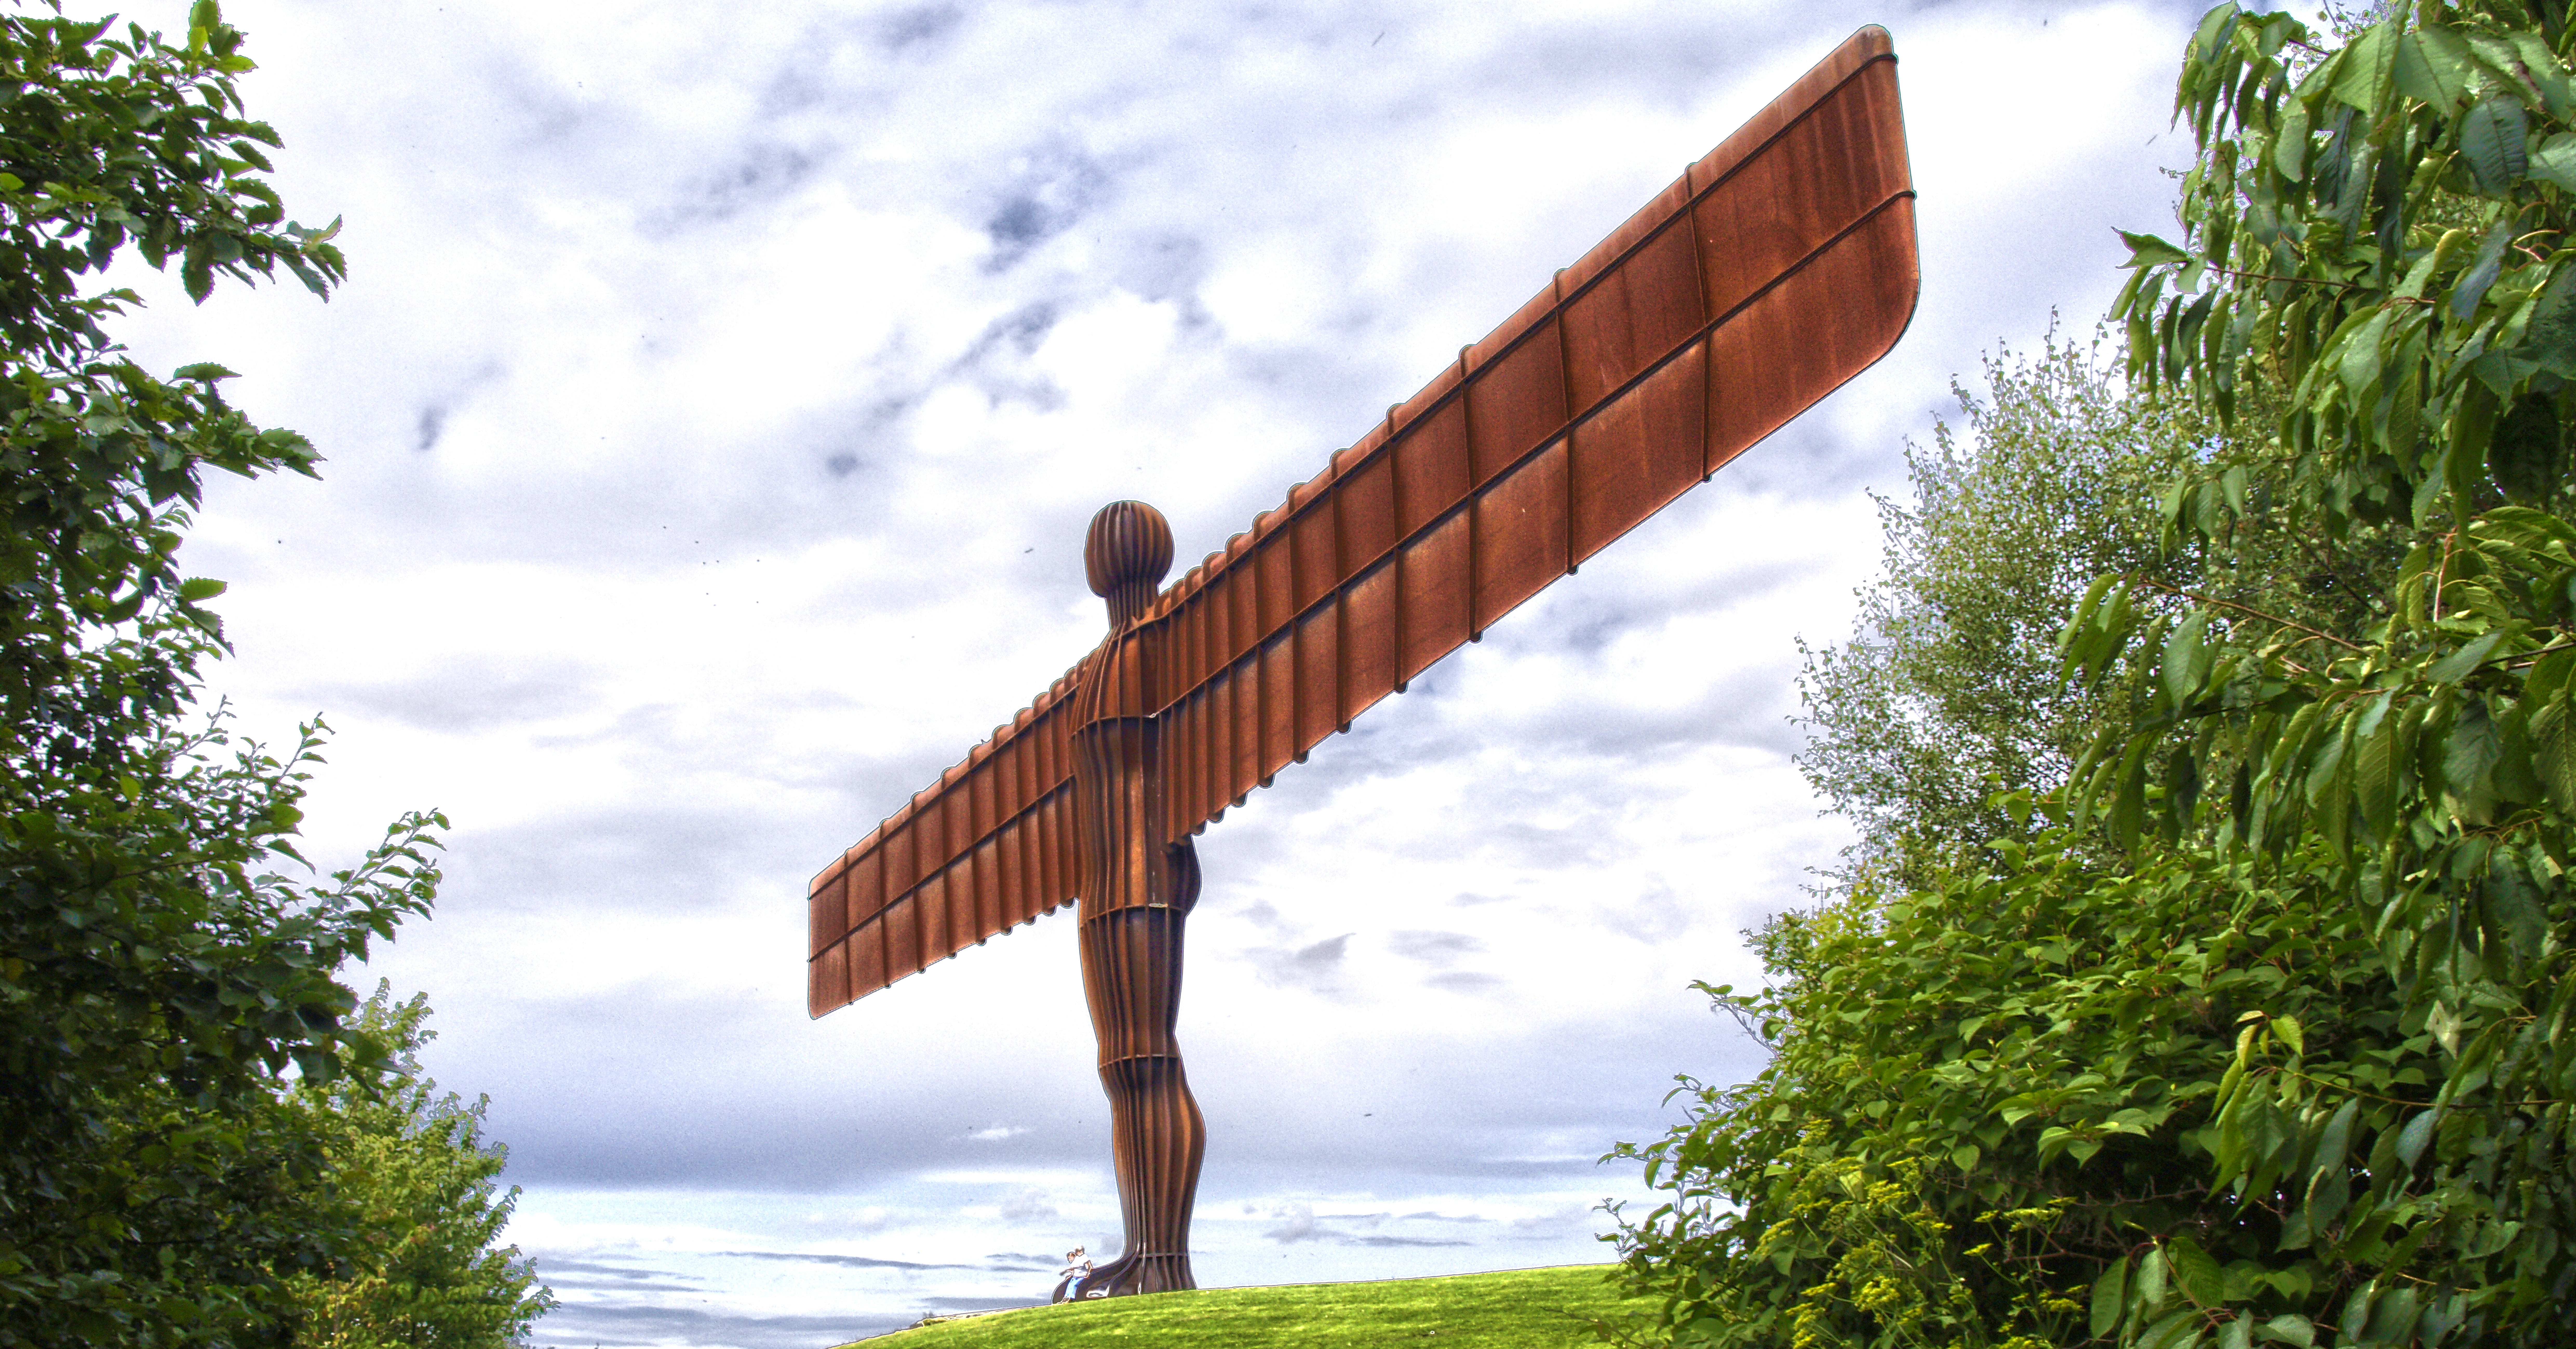 The Norths Angel: The Angel of the North.